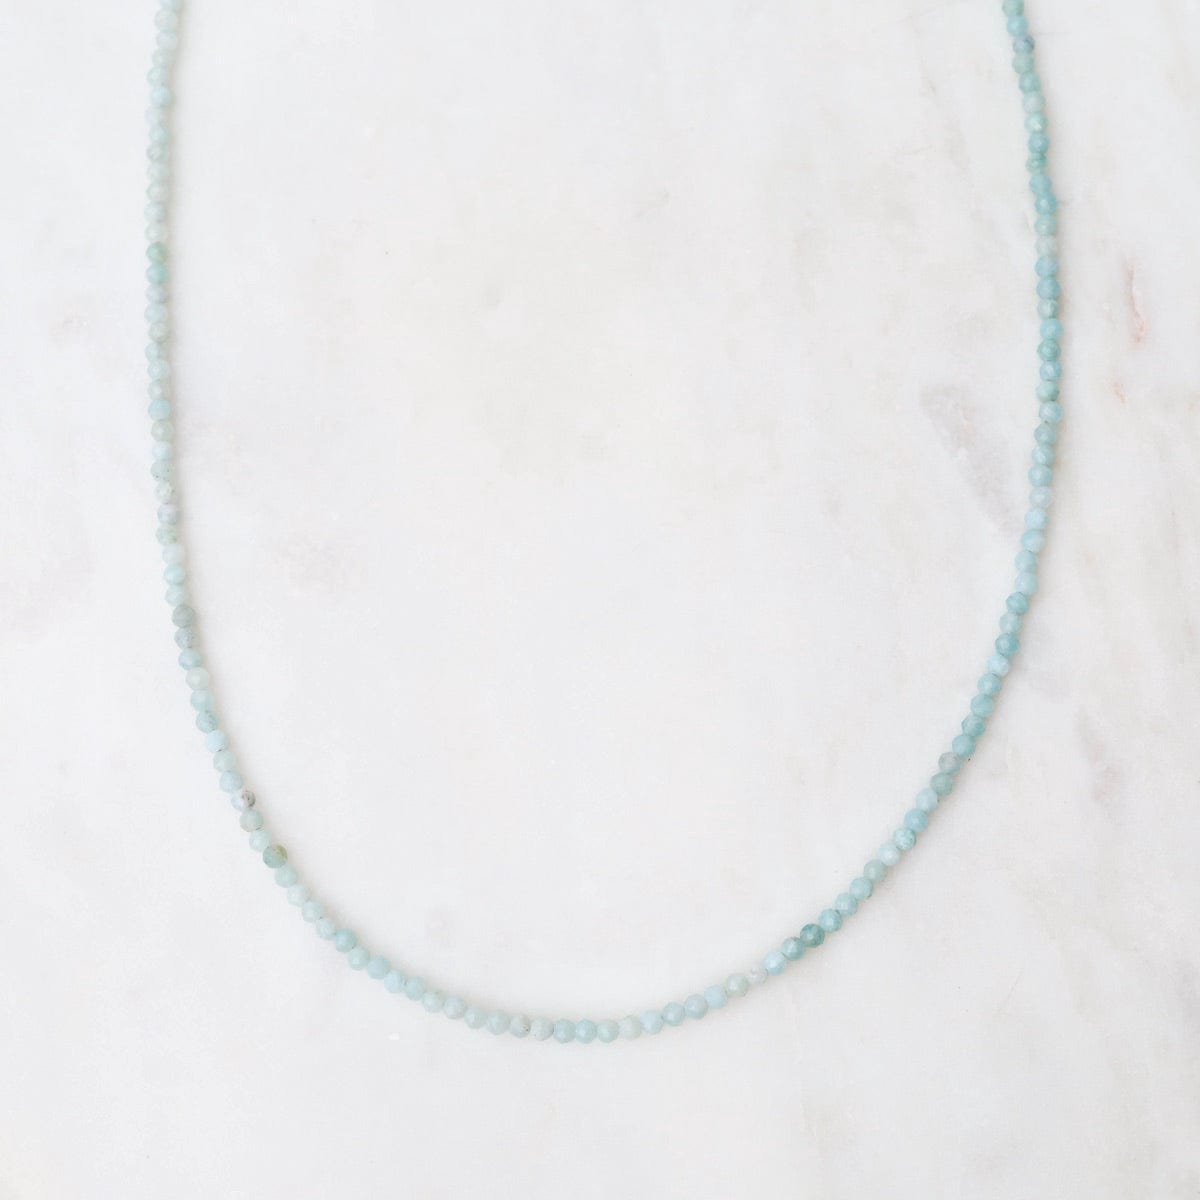 NKL Simple Stone Necklace - Amazonite